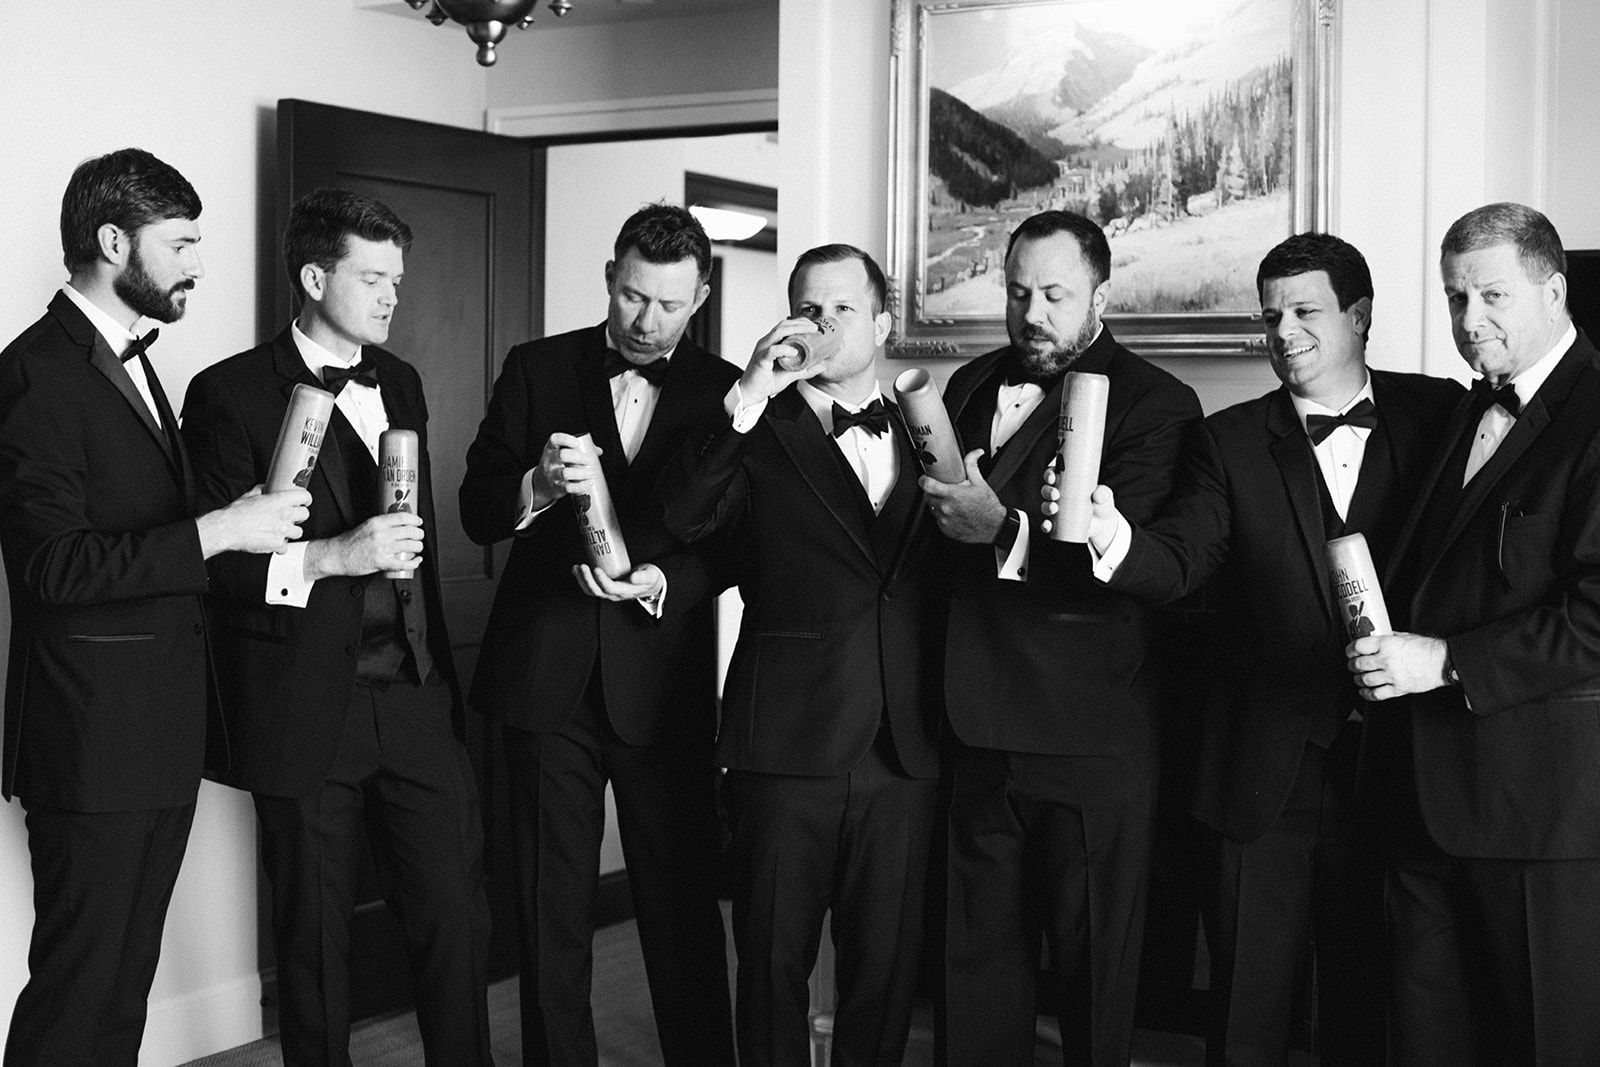 groomsmen wearing black groomsmen tuxedos have a beer together before the groom's wedding ceremony at montage deer valley resort. photo by megan robinson photography